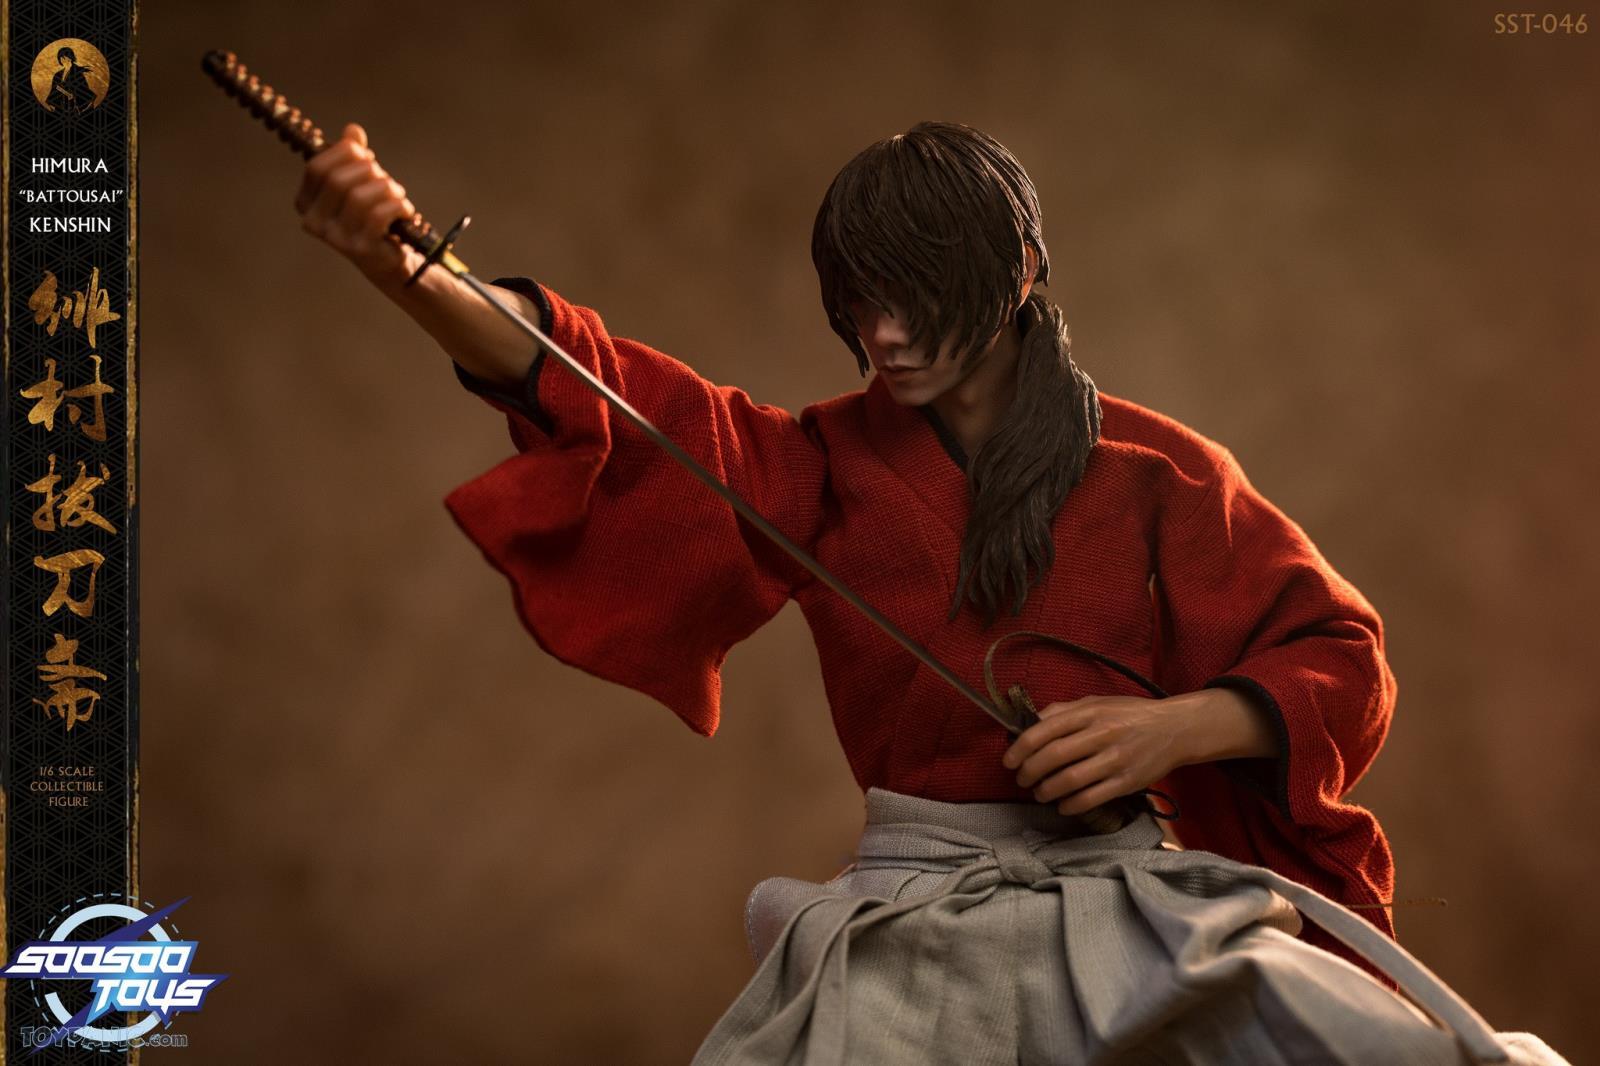 kenshin - NEW PRODUCT: 1/6 scale Rurouni Kenshin Collectible Figure from SooSooToys 712202251229PM_4050307